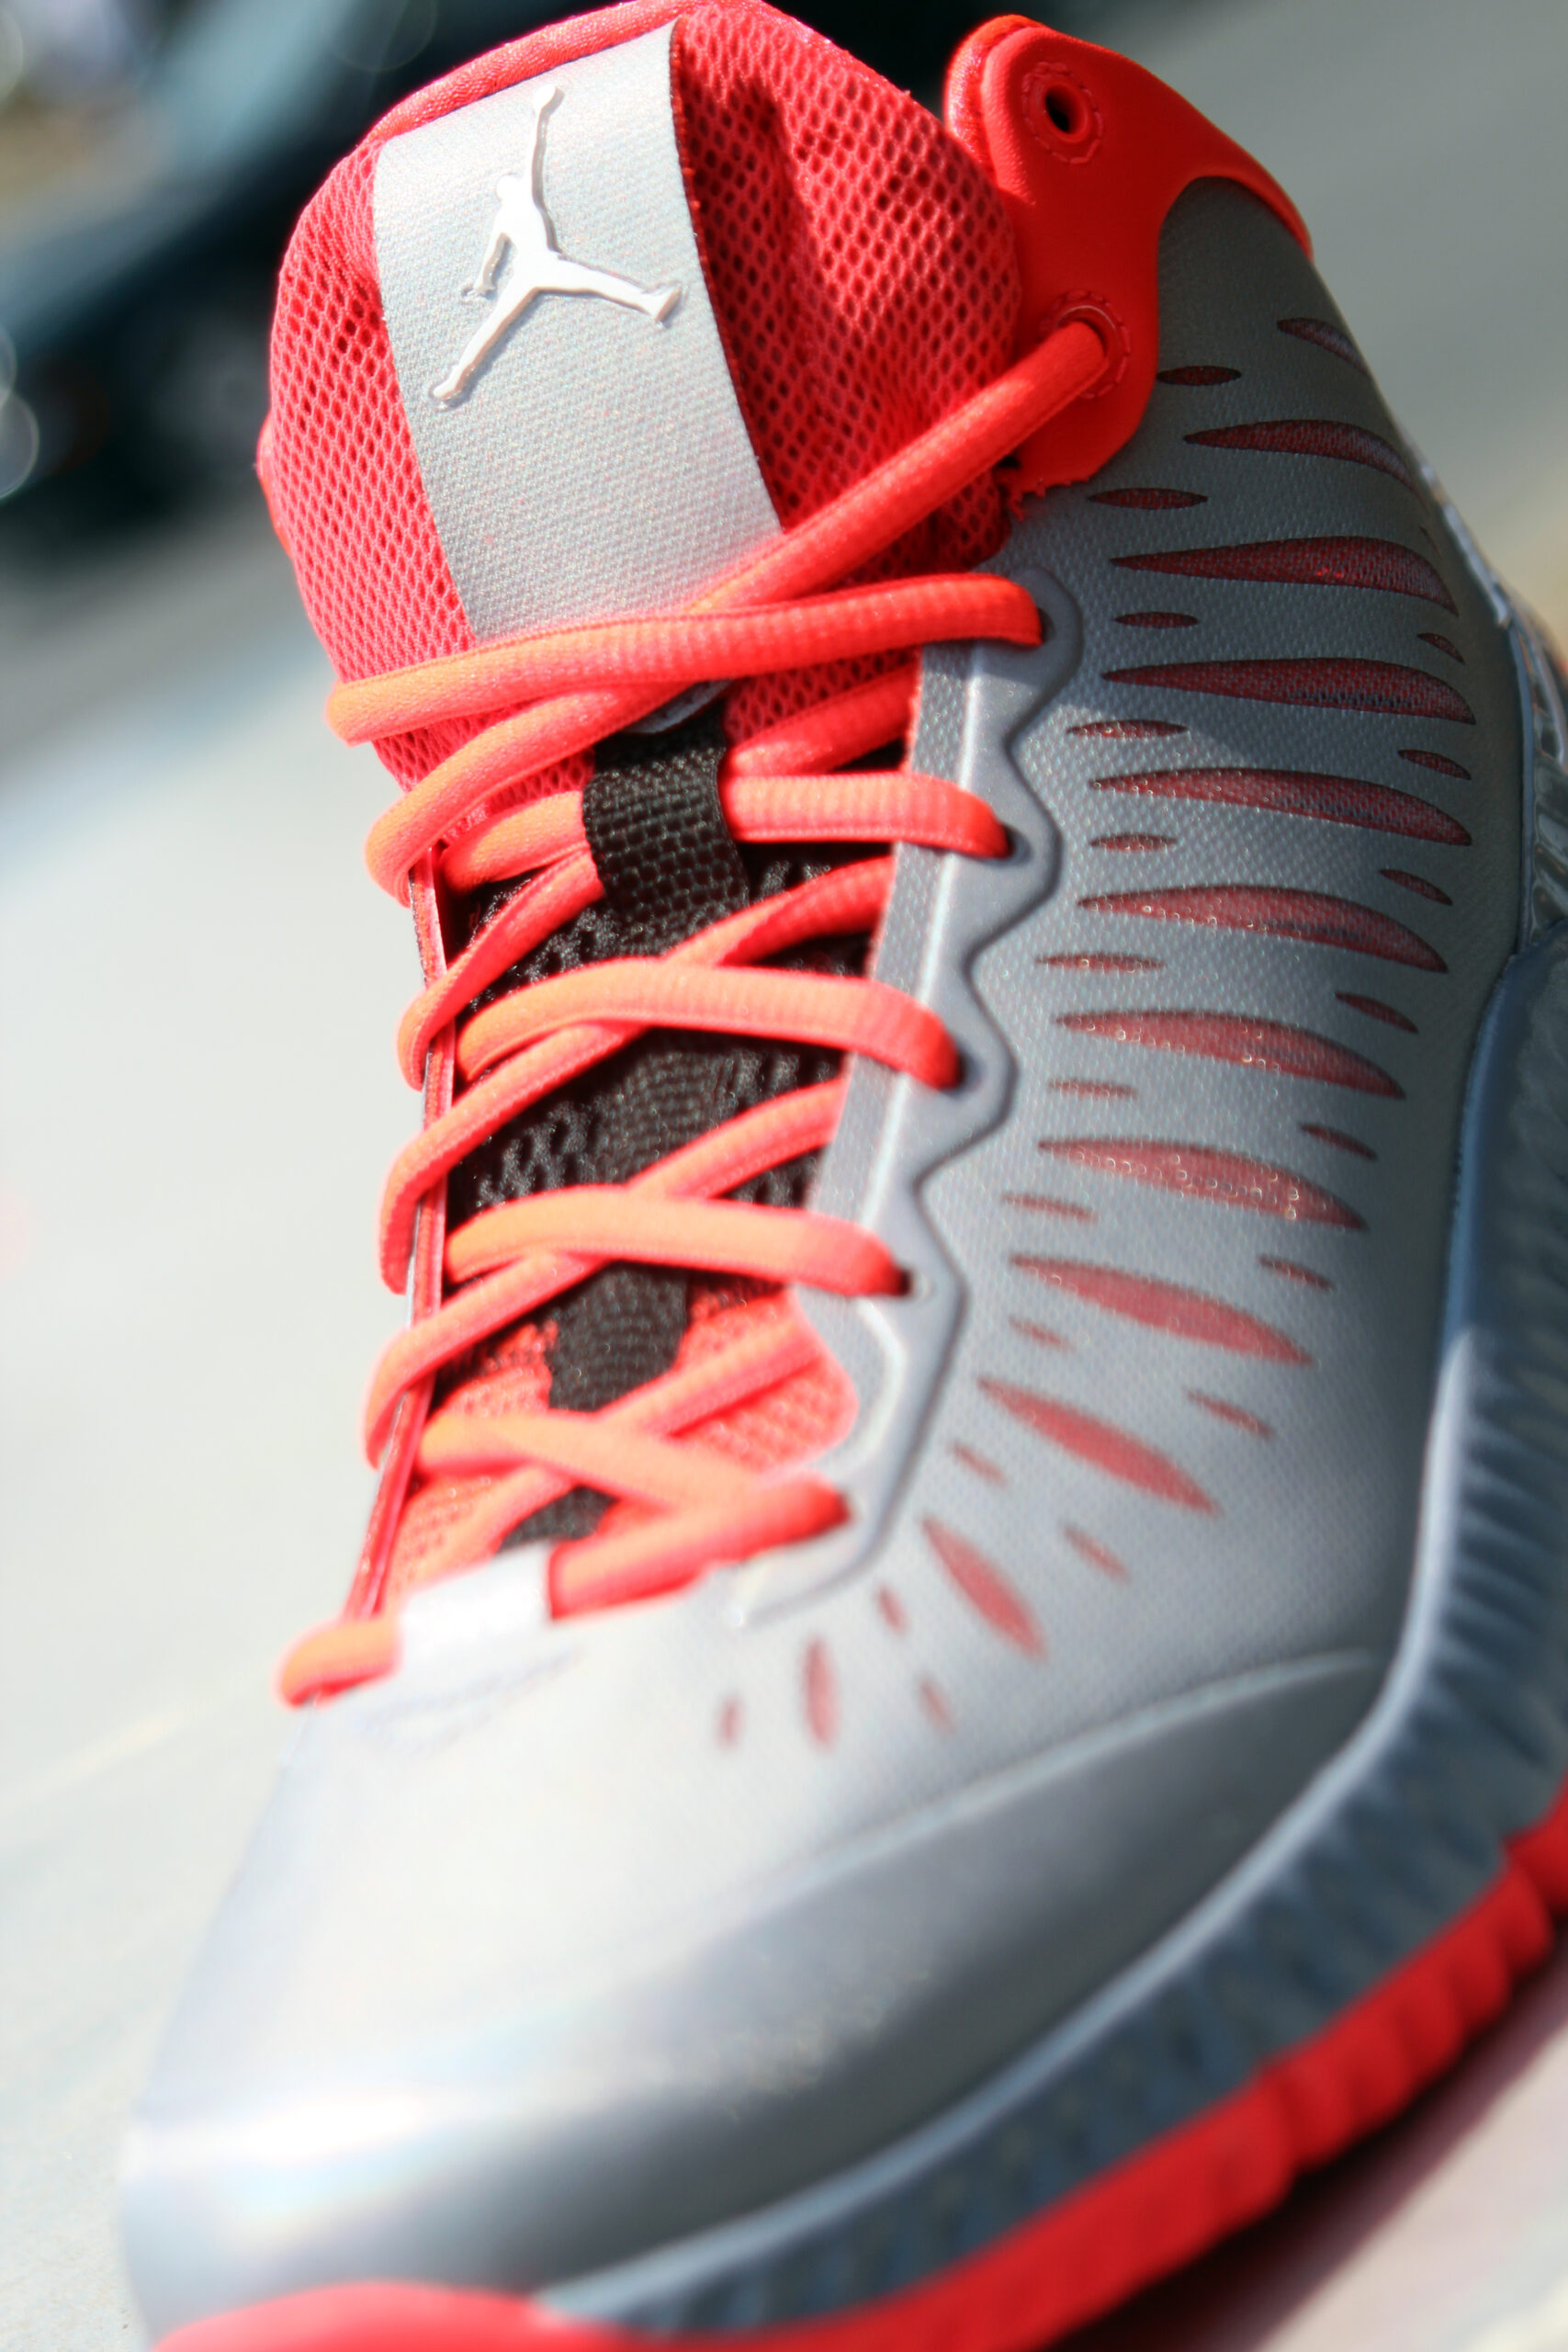 Jordan Super.Fly ‘Stealth/White-Bright Crimson-Black’ – Another Look